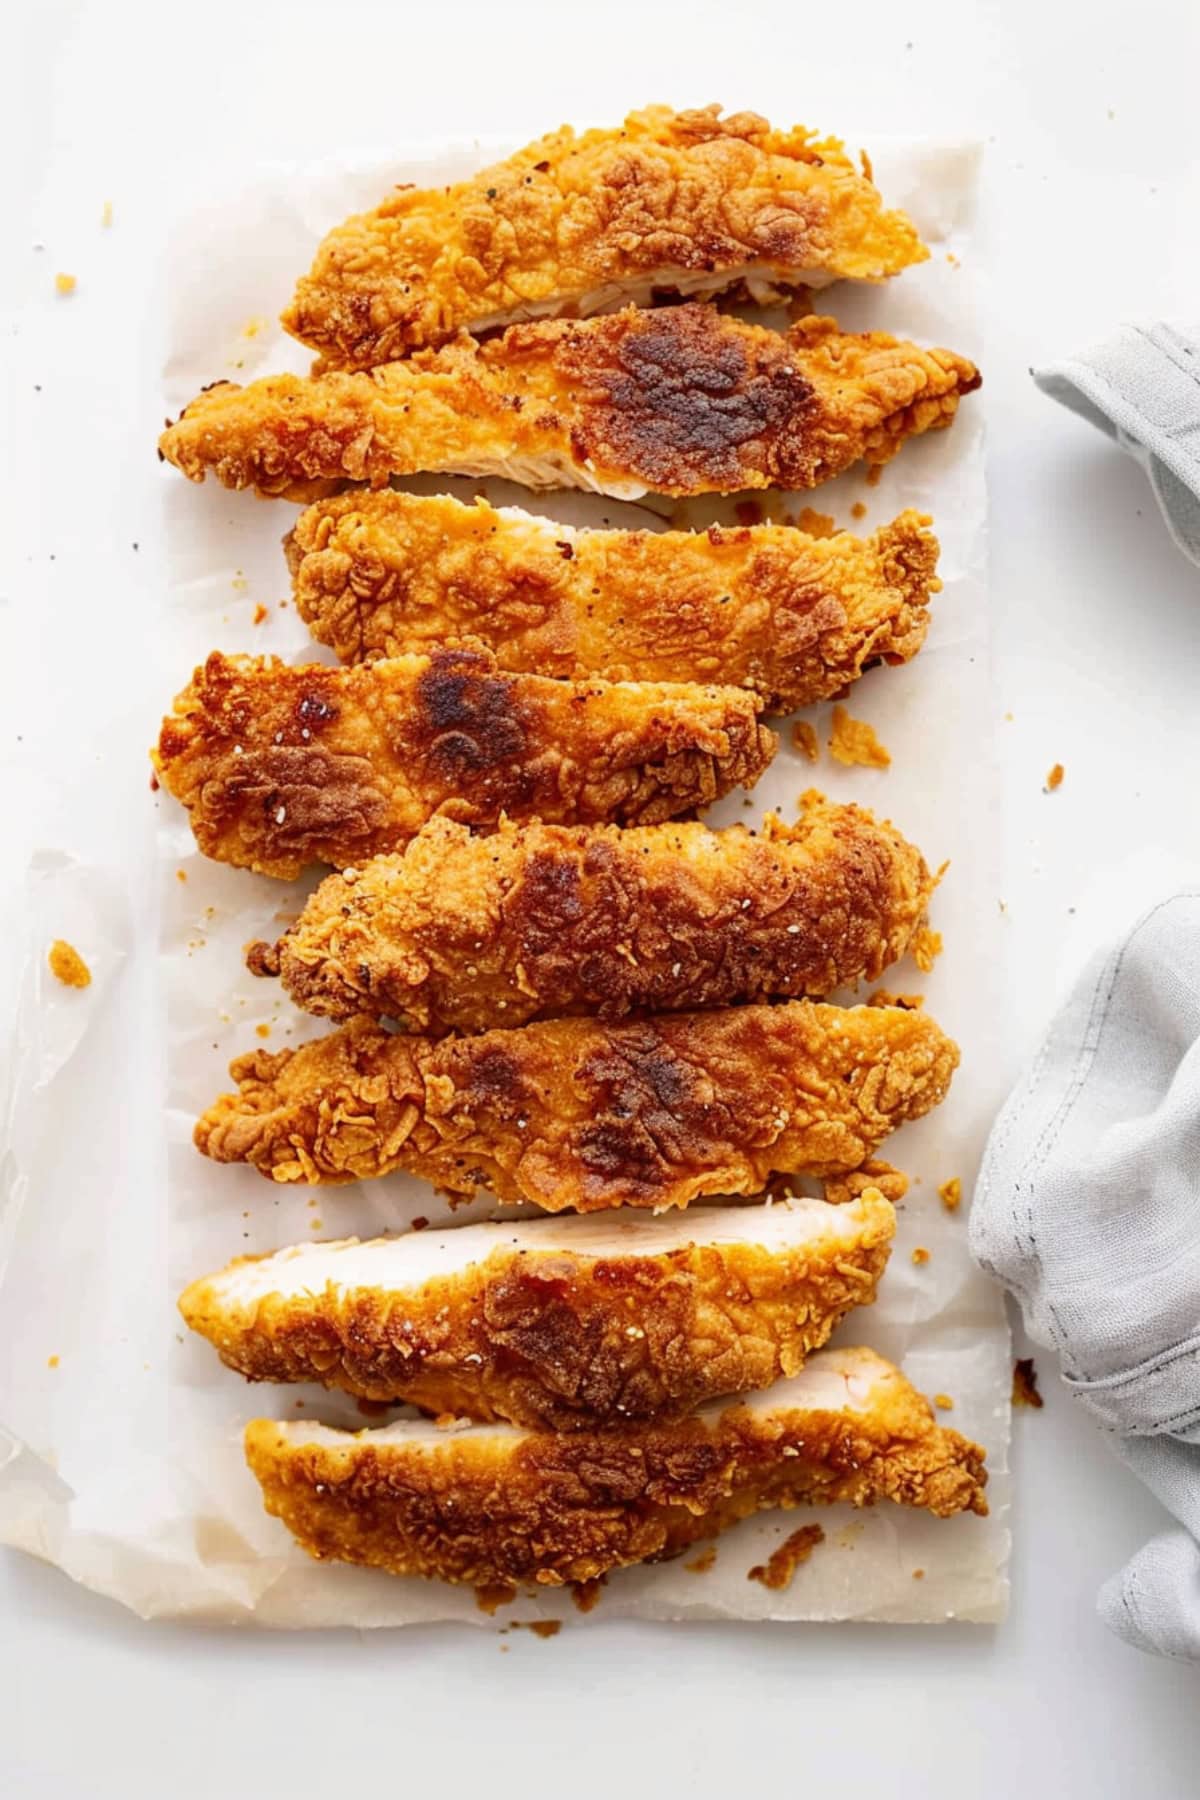 Overhead view of chicken strips on a parchment paper.